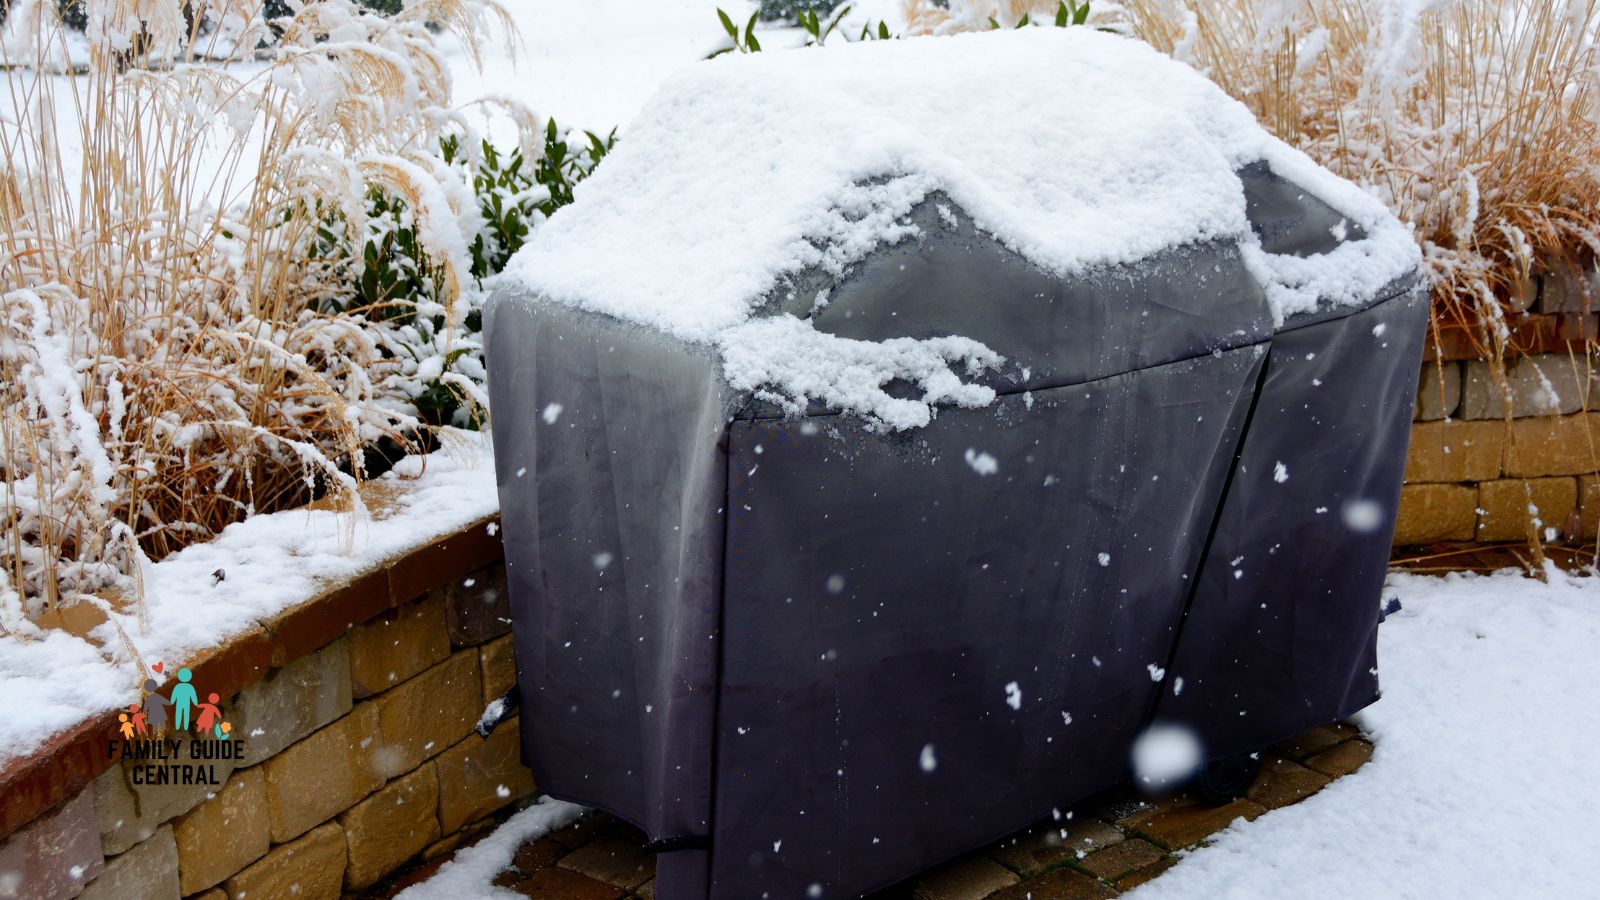 Grill covered in snow - familyguidecentral.com